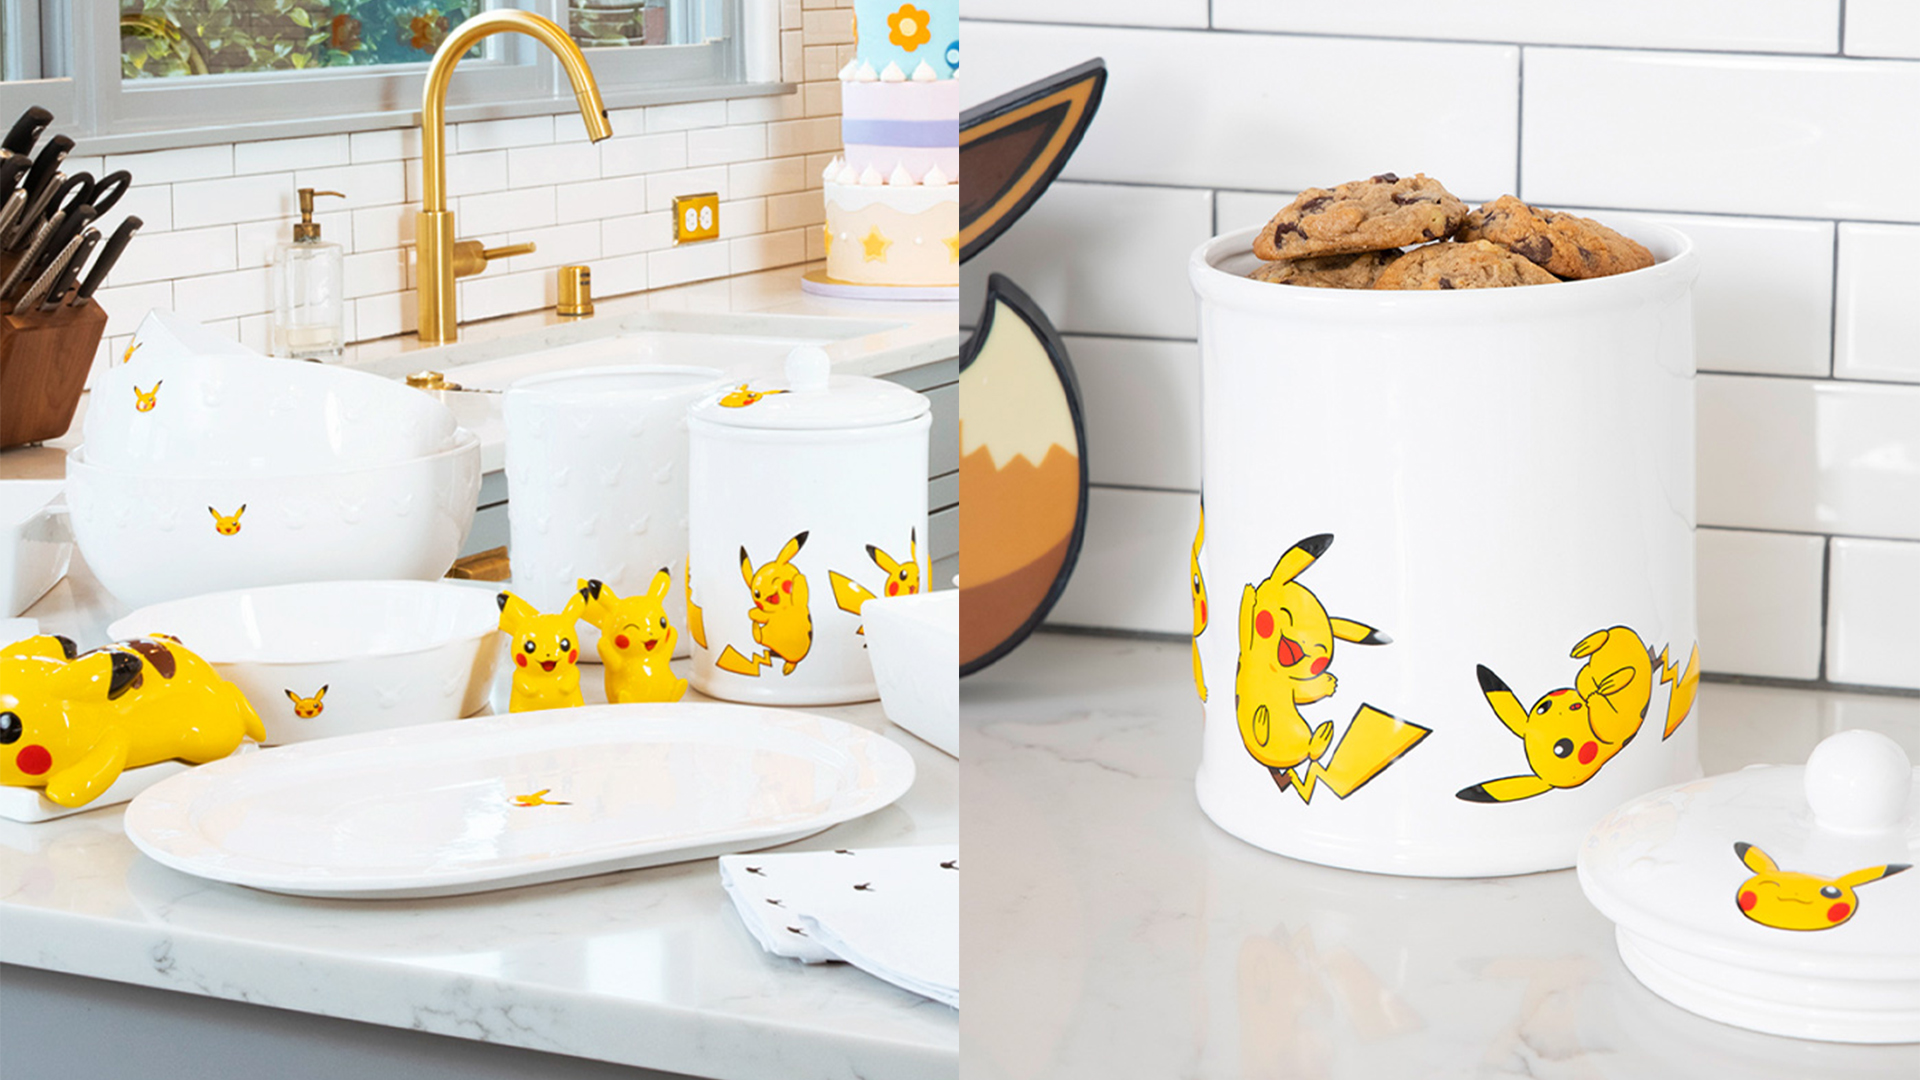 Pokémon Is Releasing a Full Tableware and Kitchen Accessories Collection